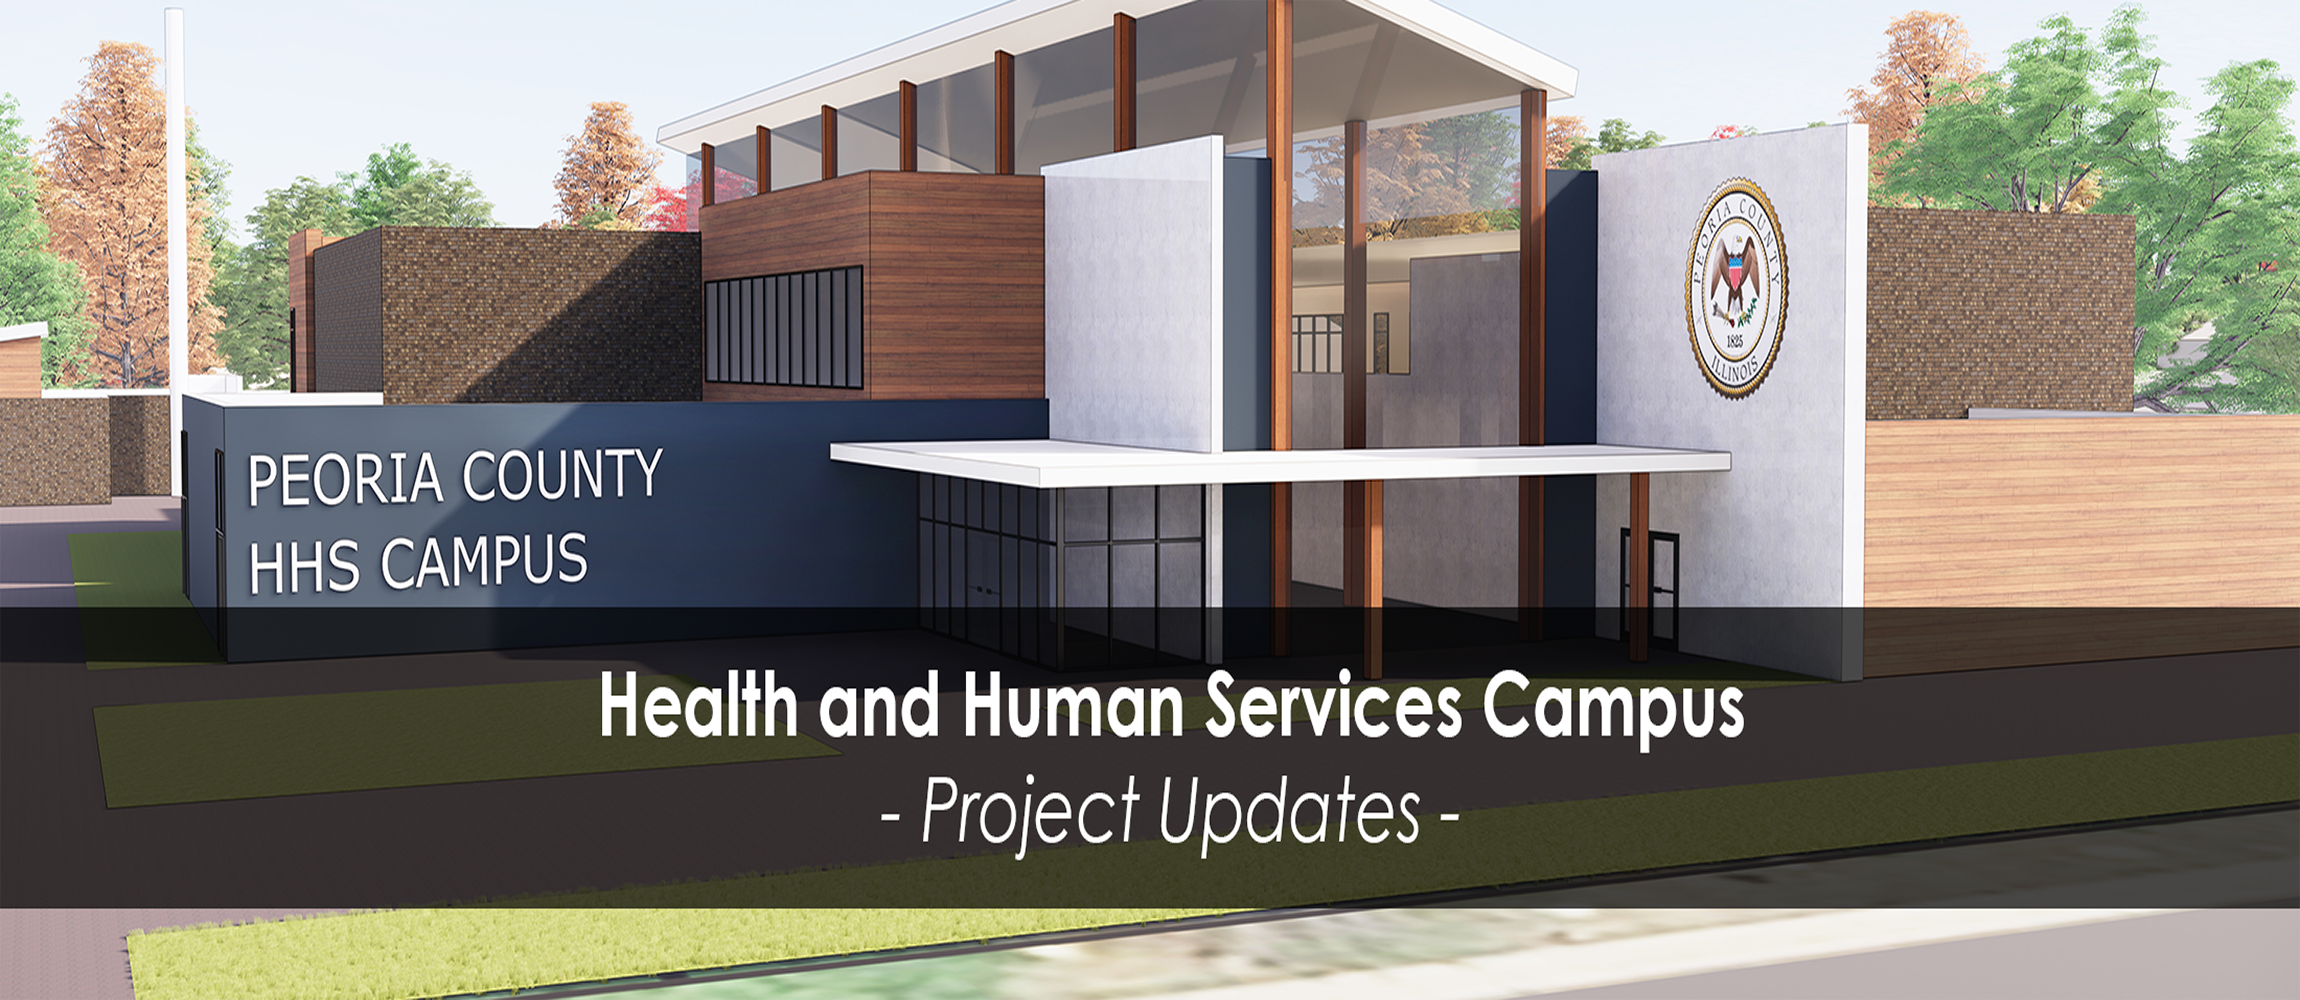 Peoria County Health and Human Services Campus